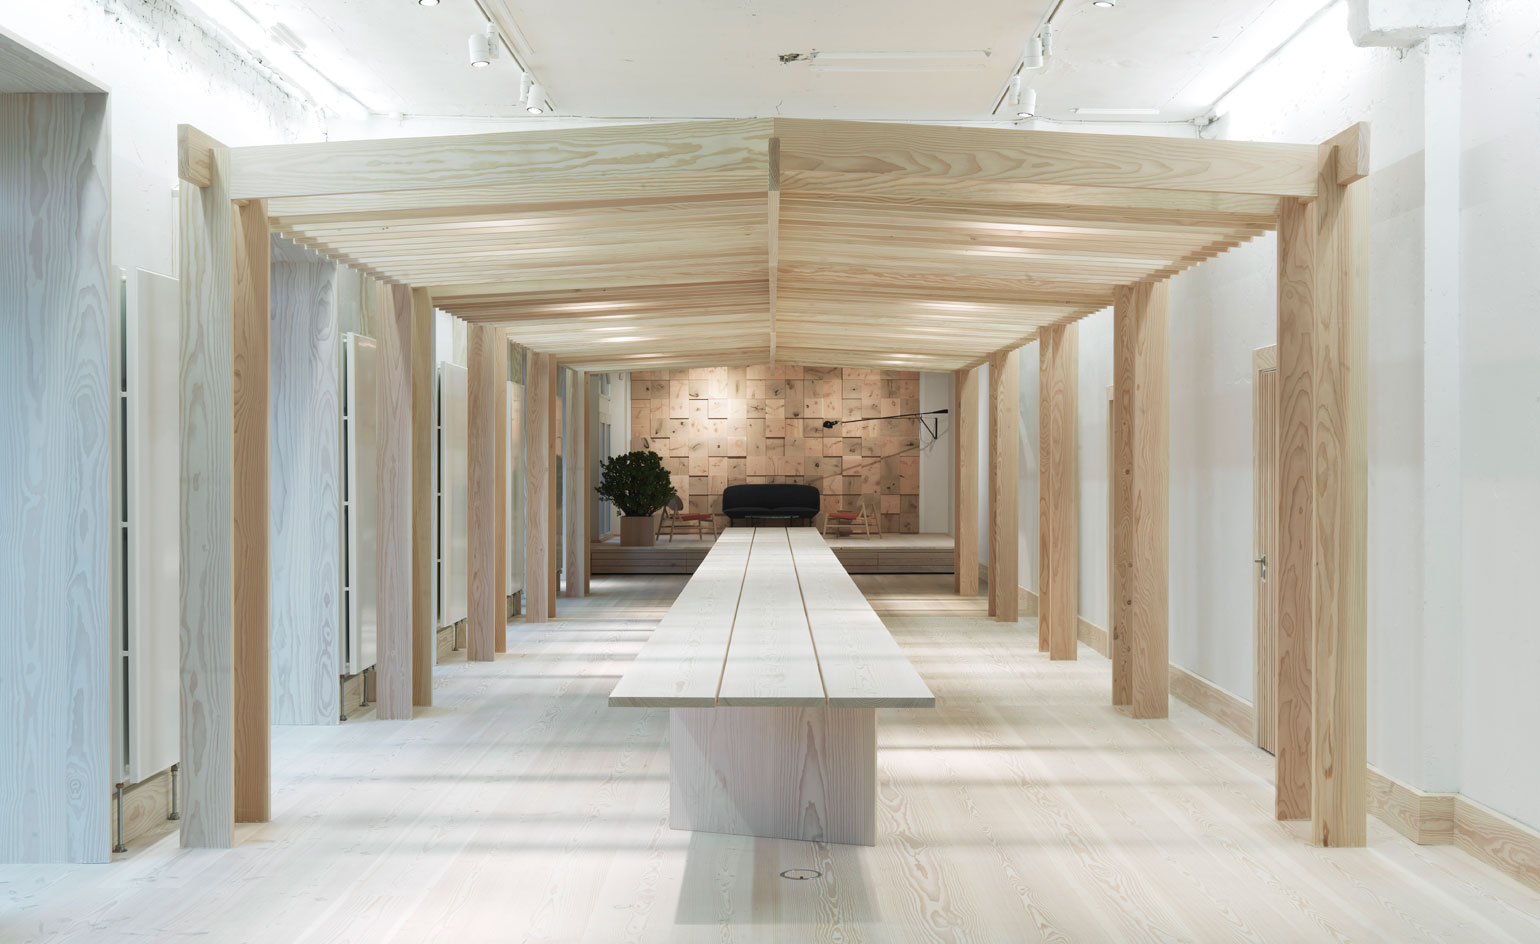 Dinesen S New Showroom By Oeo Explores The Past And Future Of Its Wood Wallpaper